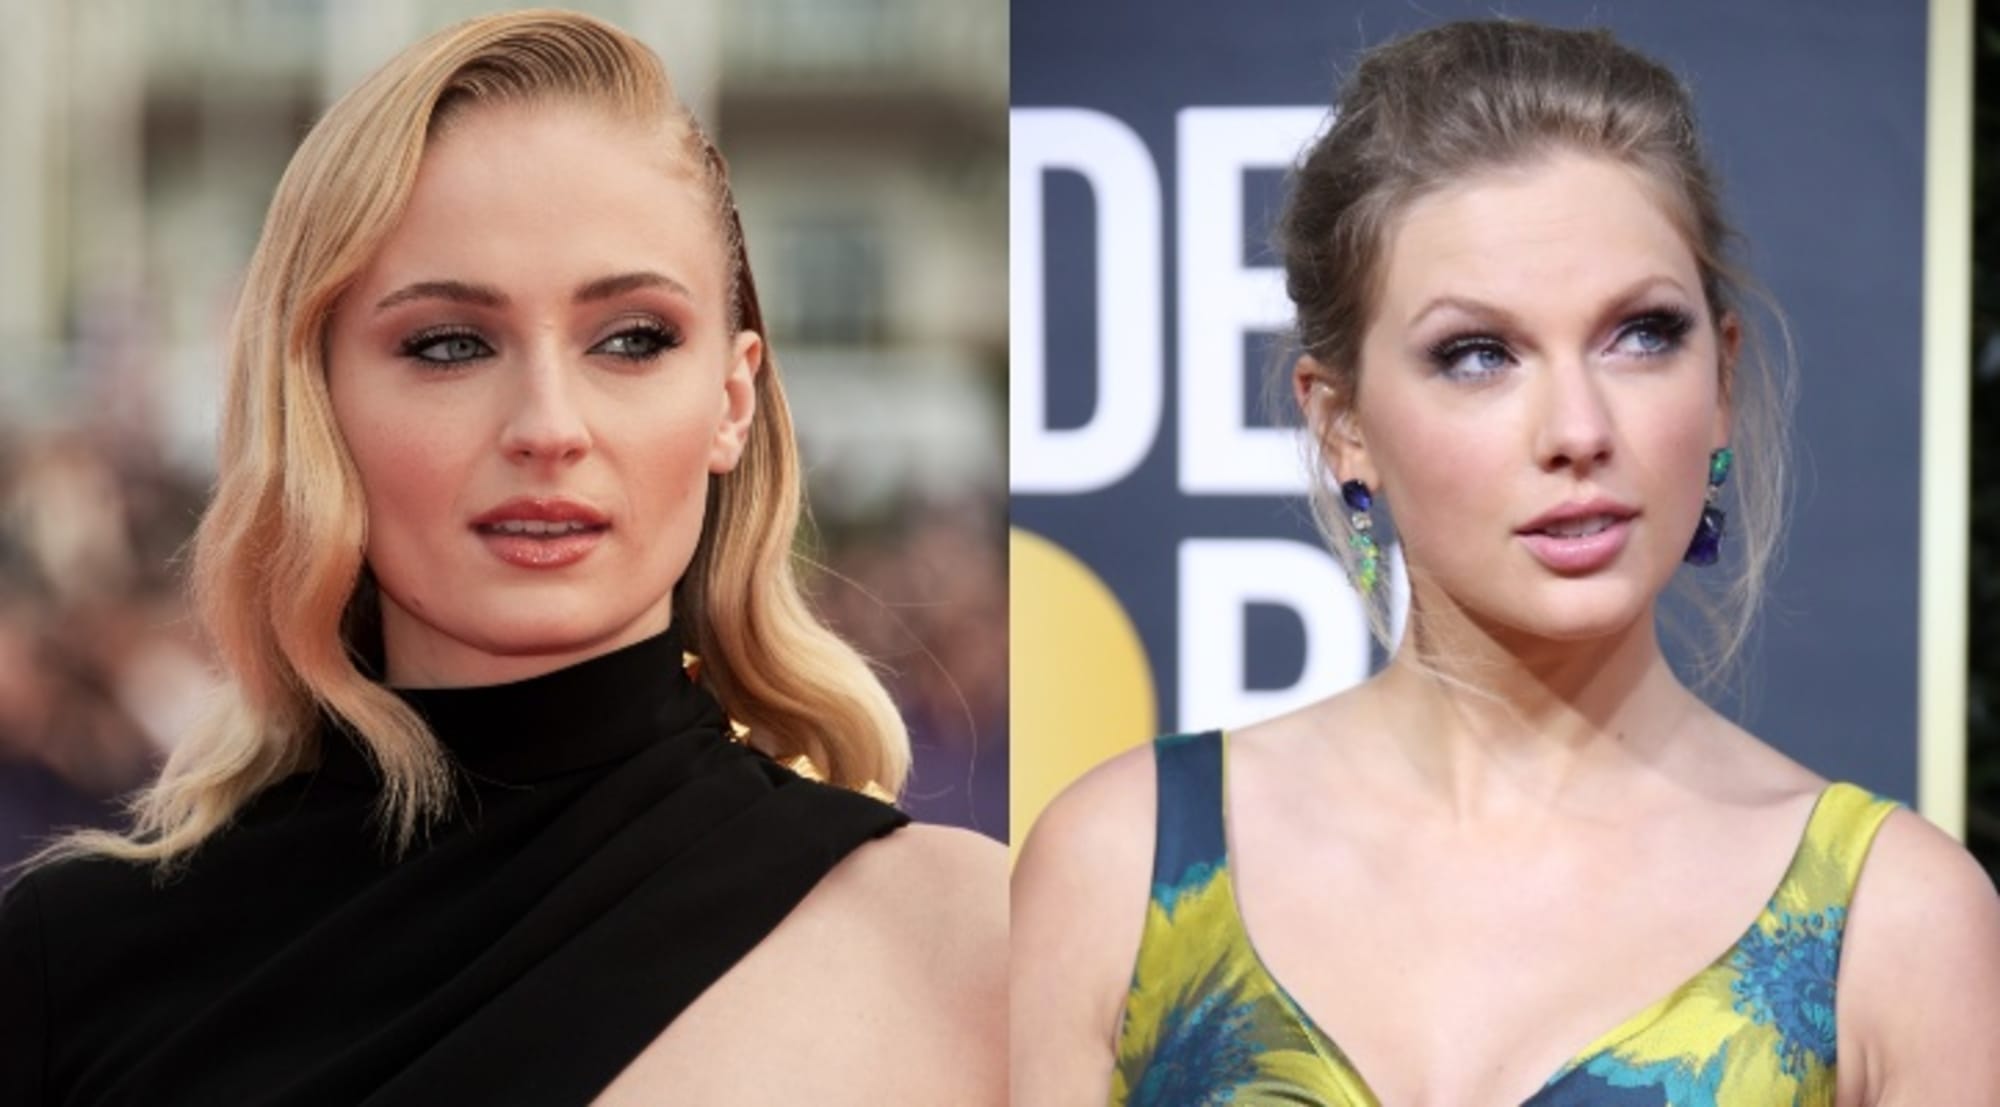 Finally, it’s the Sophie Turner-Taylor Swift crossover we’ve been waiting for